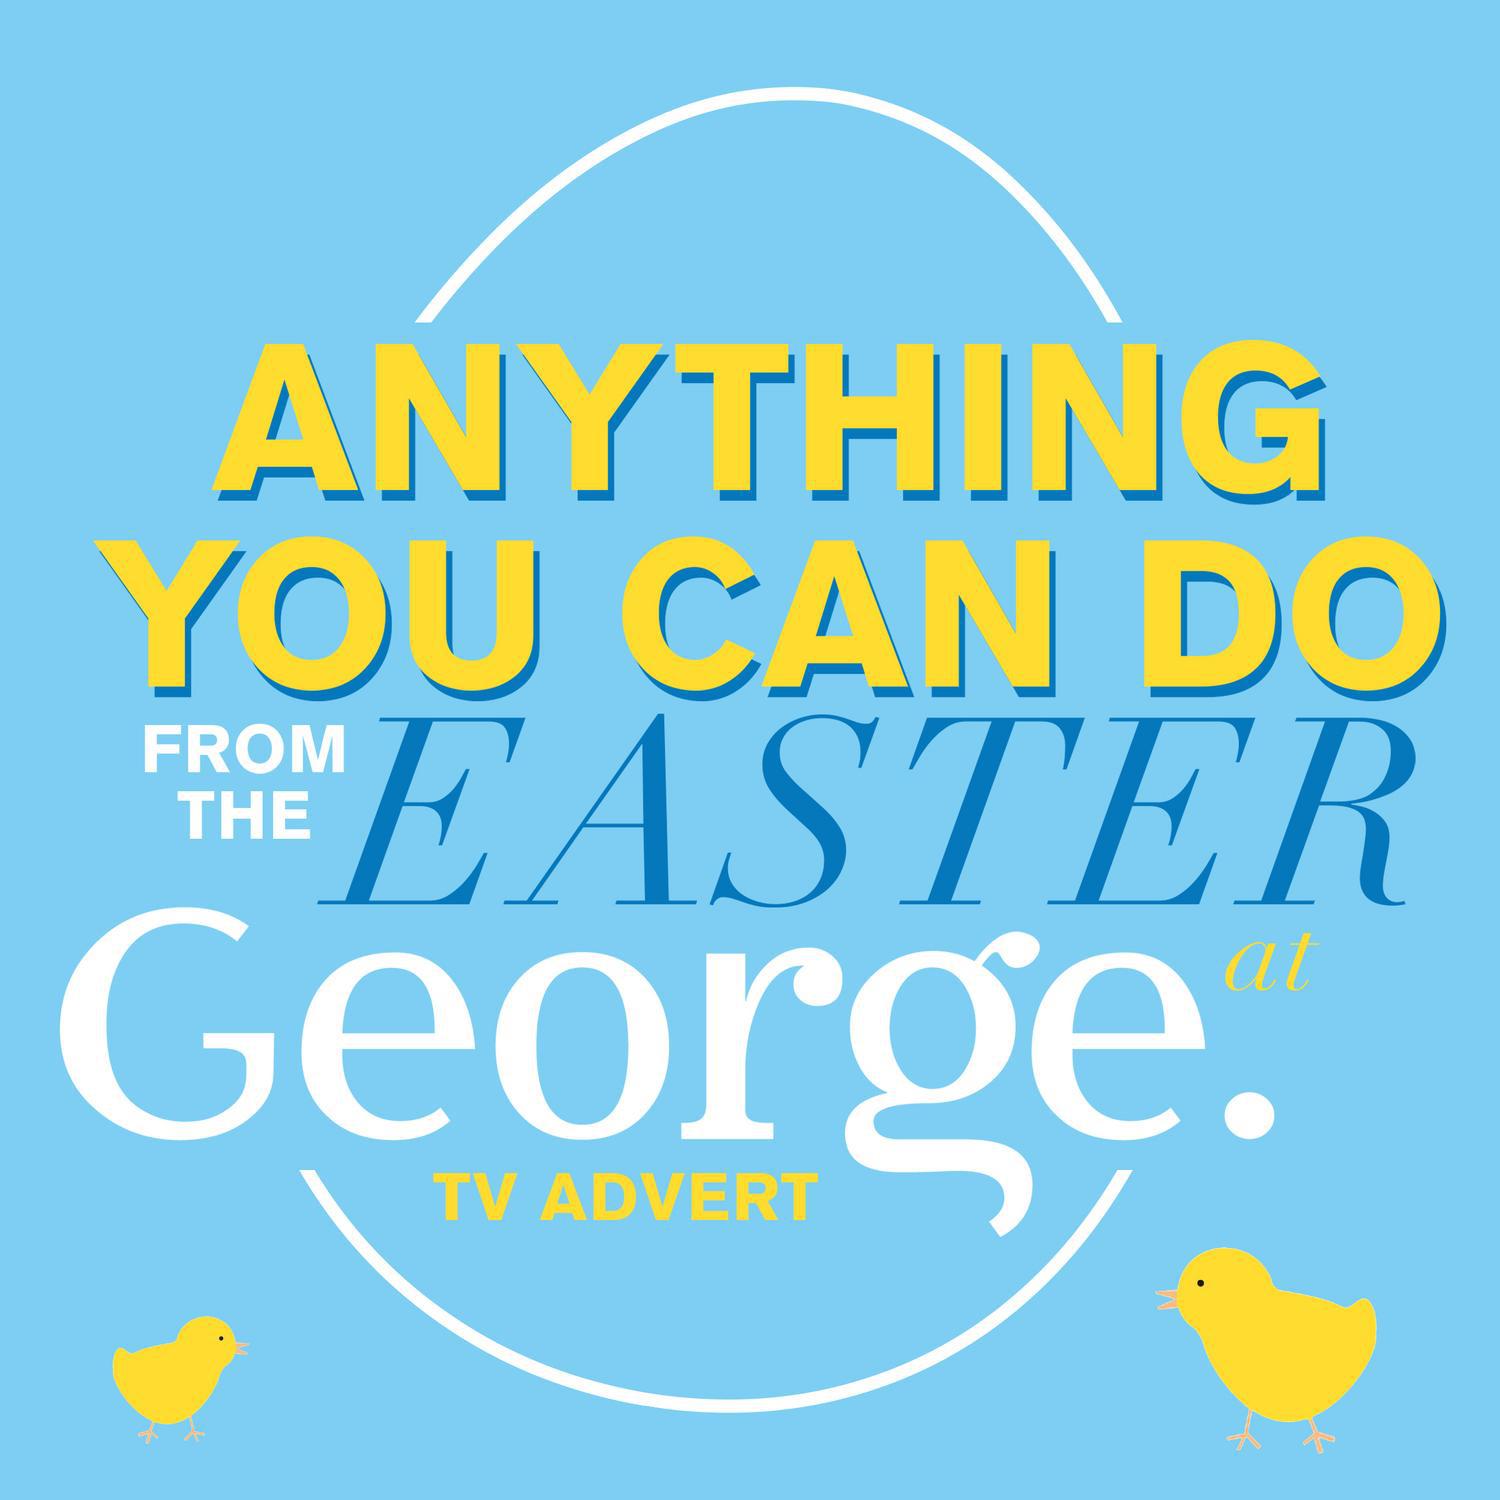 Anything You Can Do (From The "Easter at George" T.V. Advert)